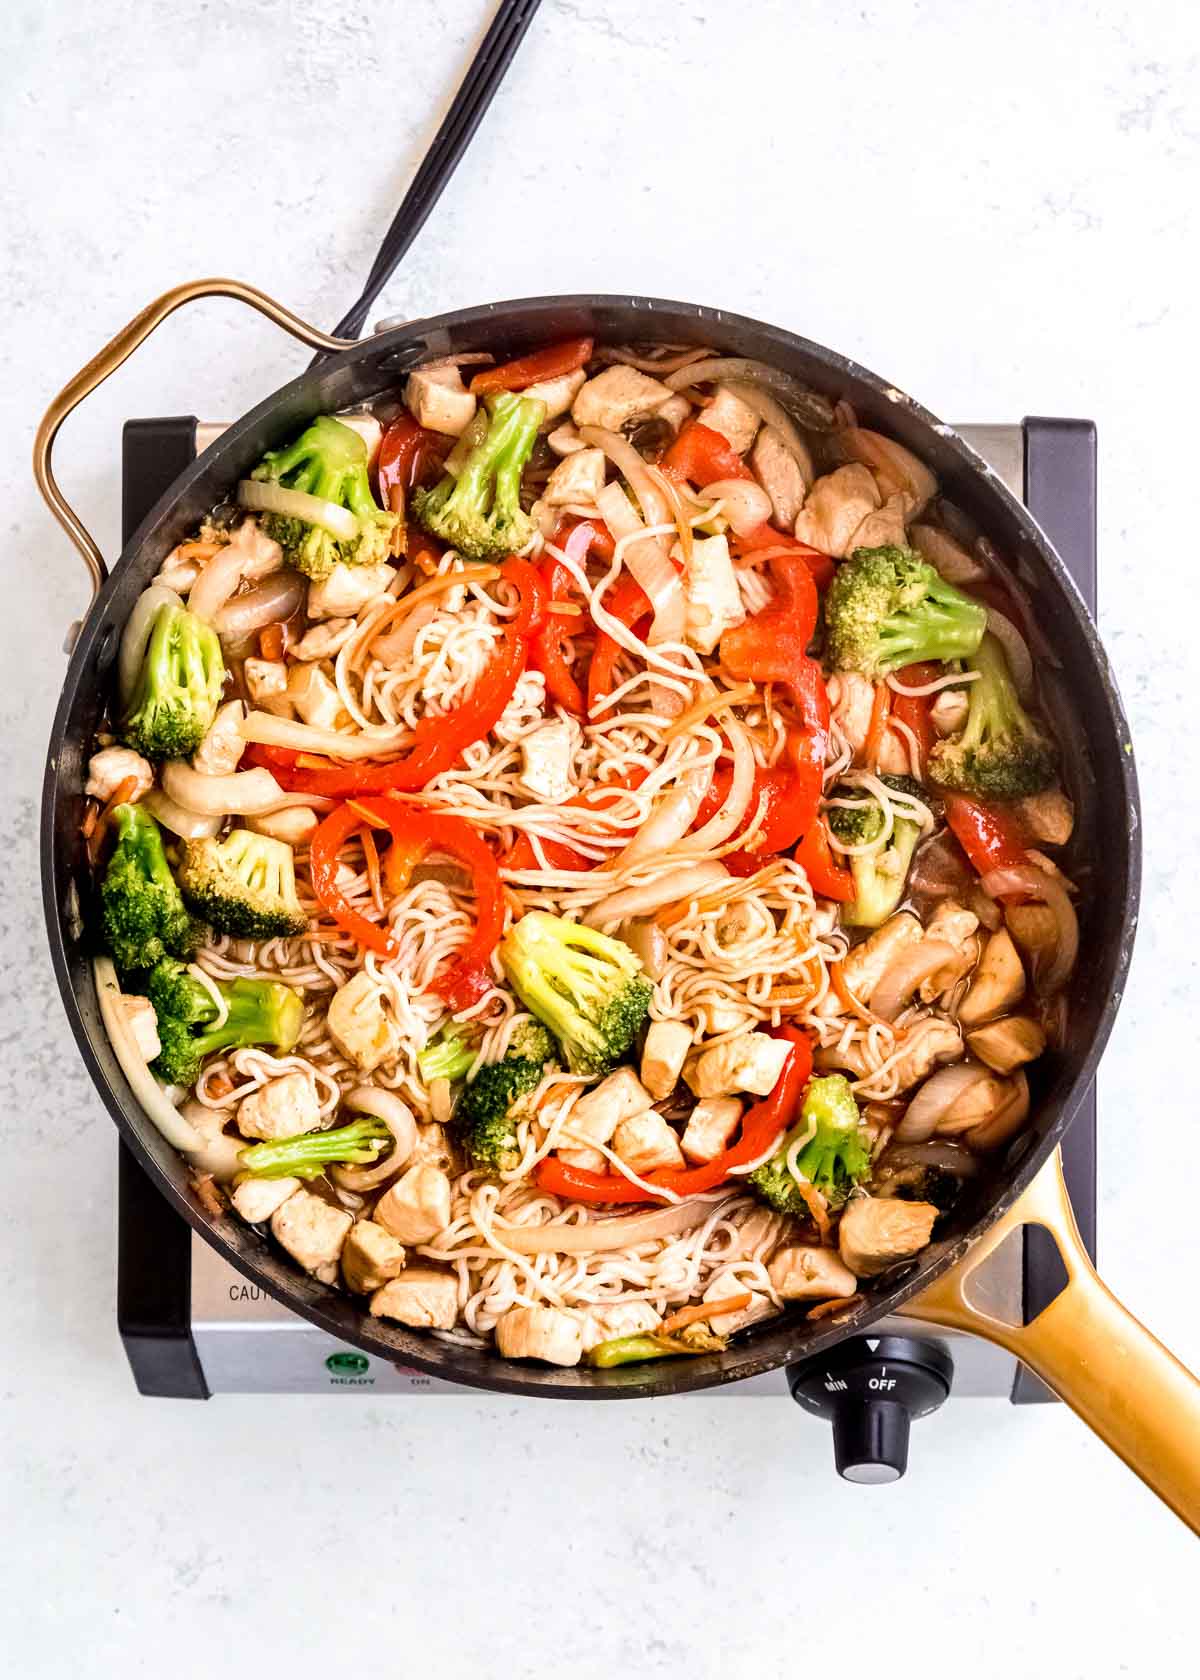 stir fry sauce stirred into the shirataki noodles, chicken, and sauteed vegetables